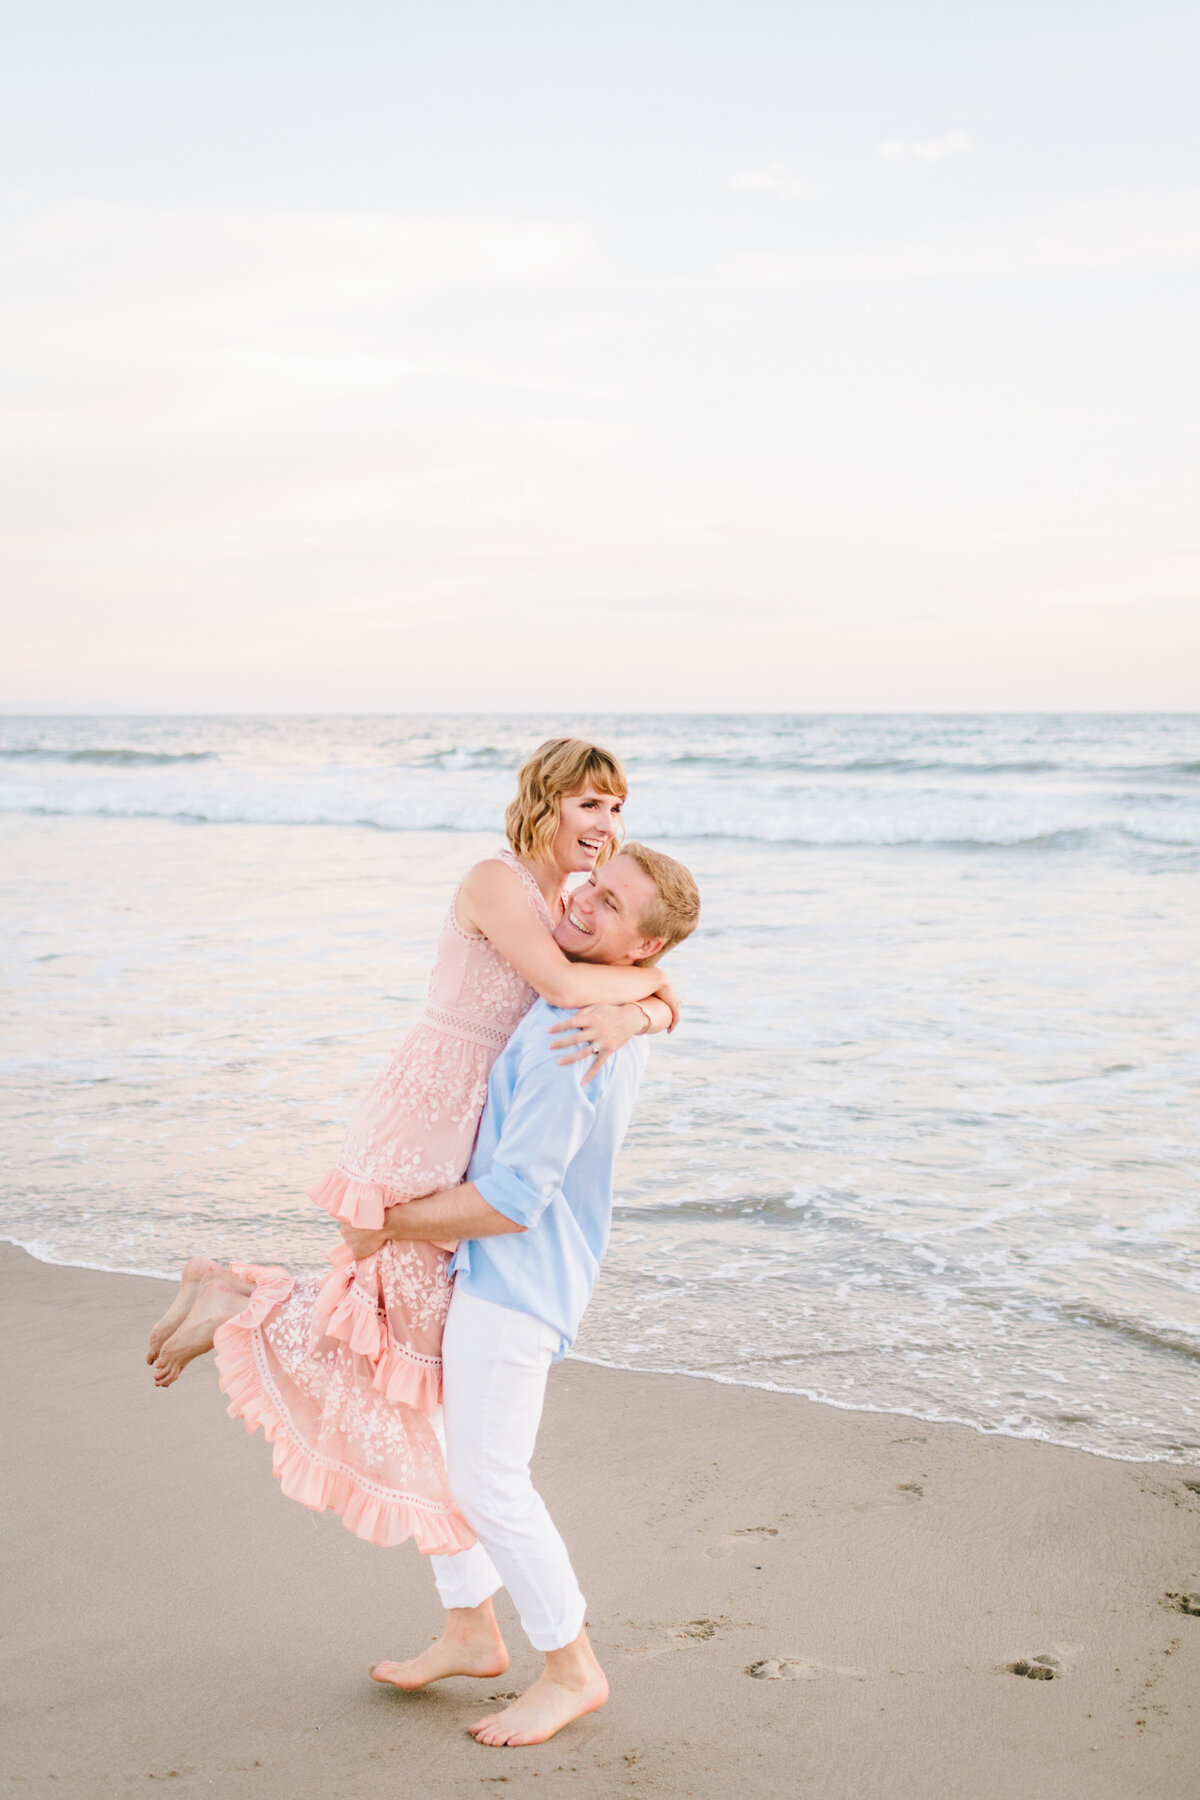 Best California and Texas Engagement Photographer-Jodee Debes Photography-113